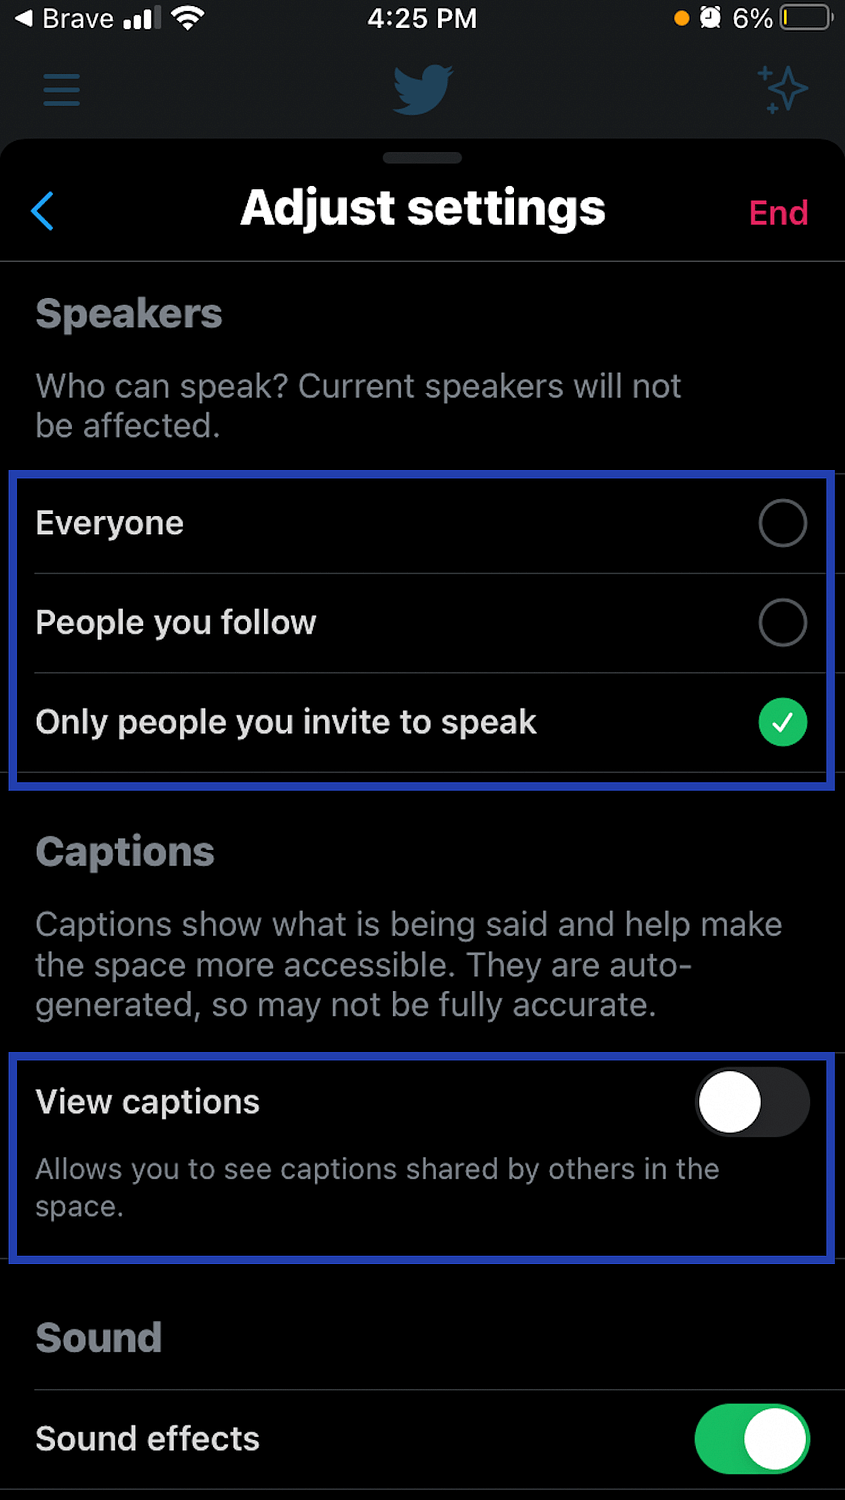 settings on Twitter Spaces.